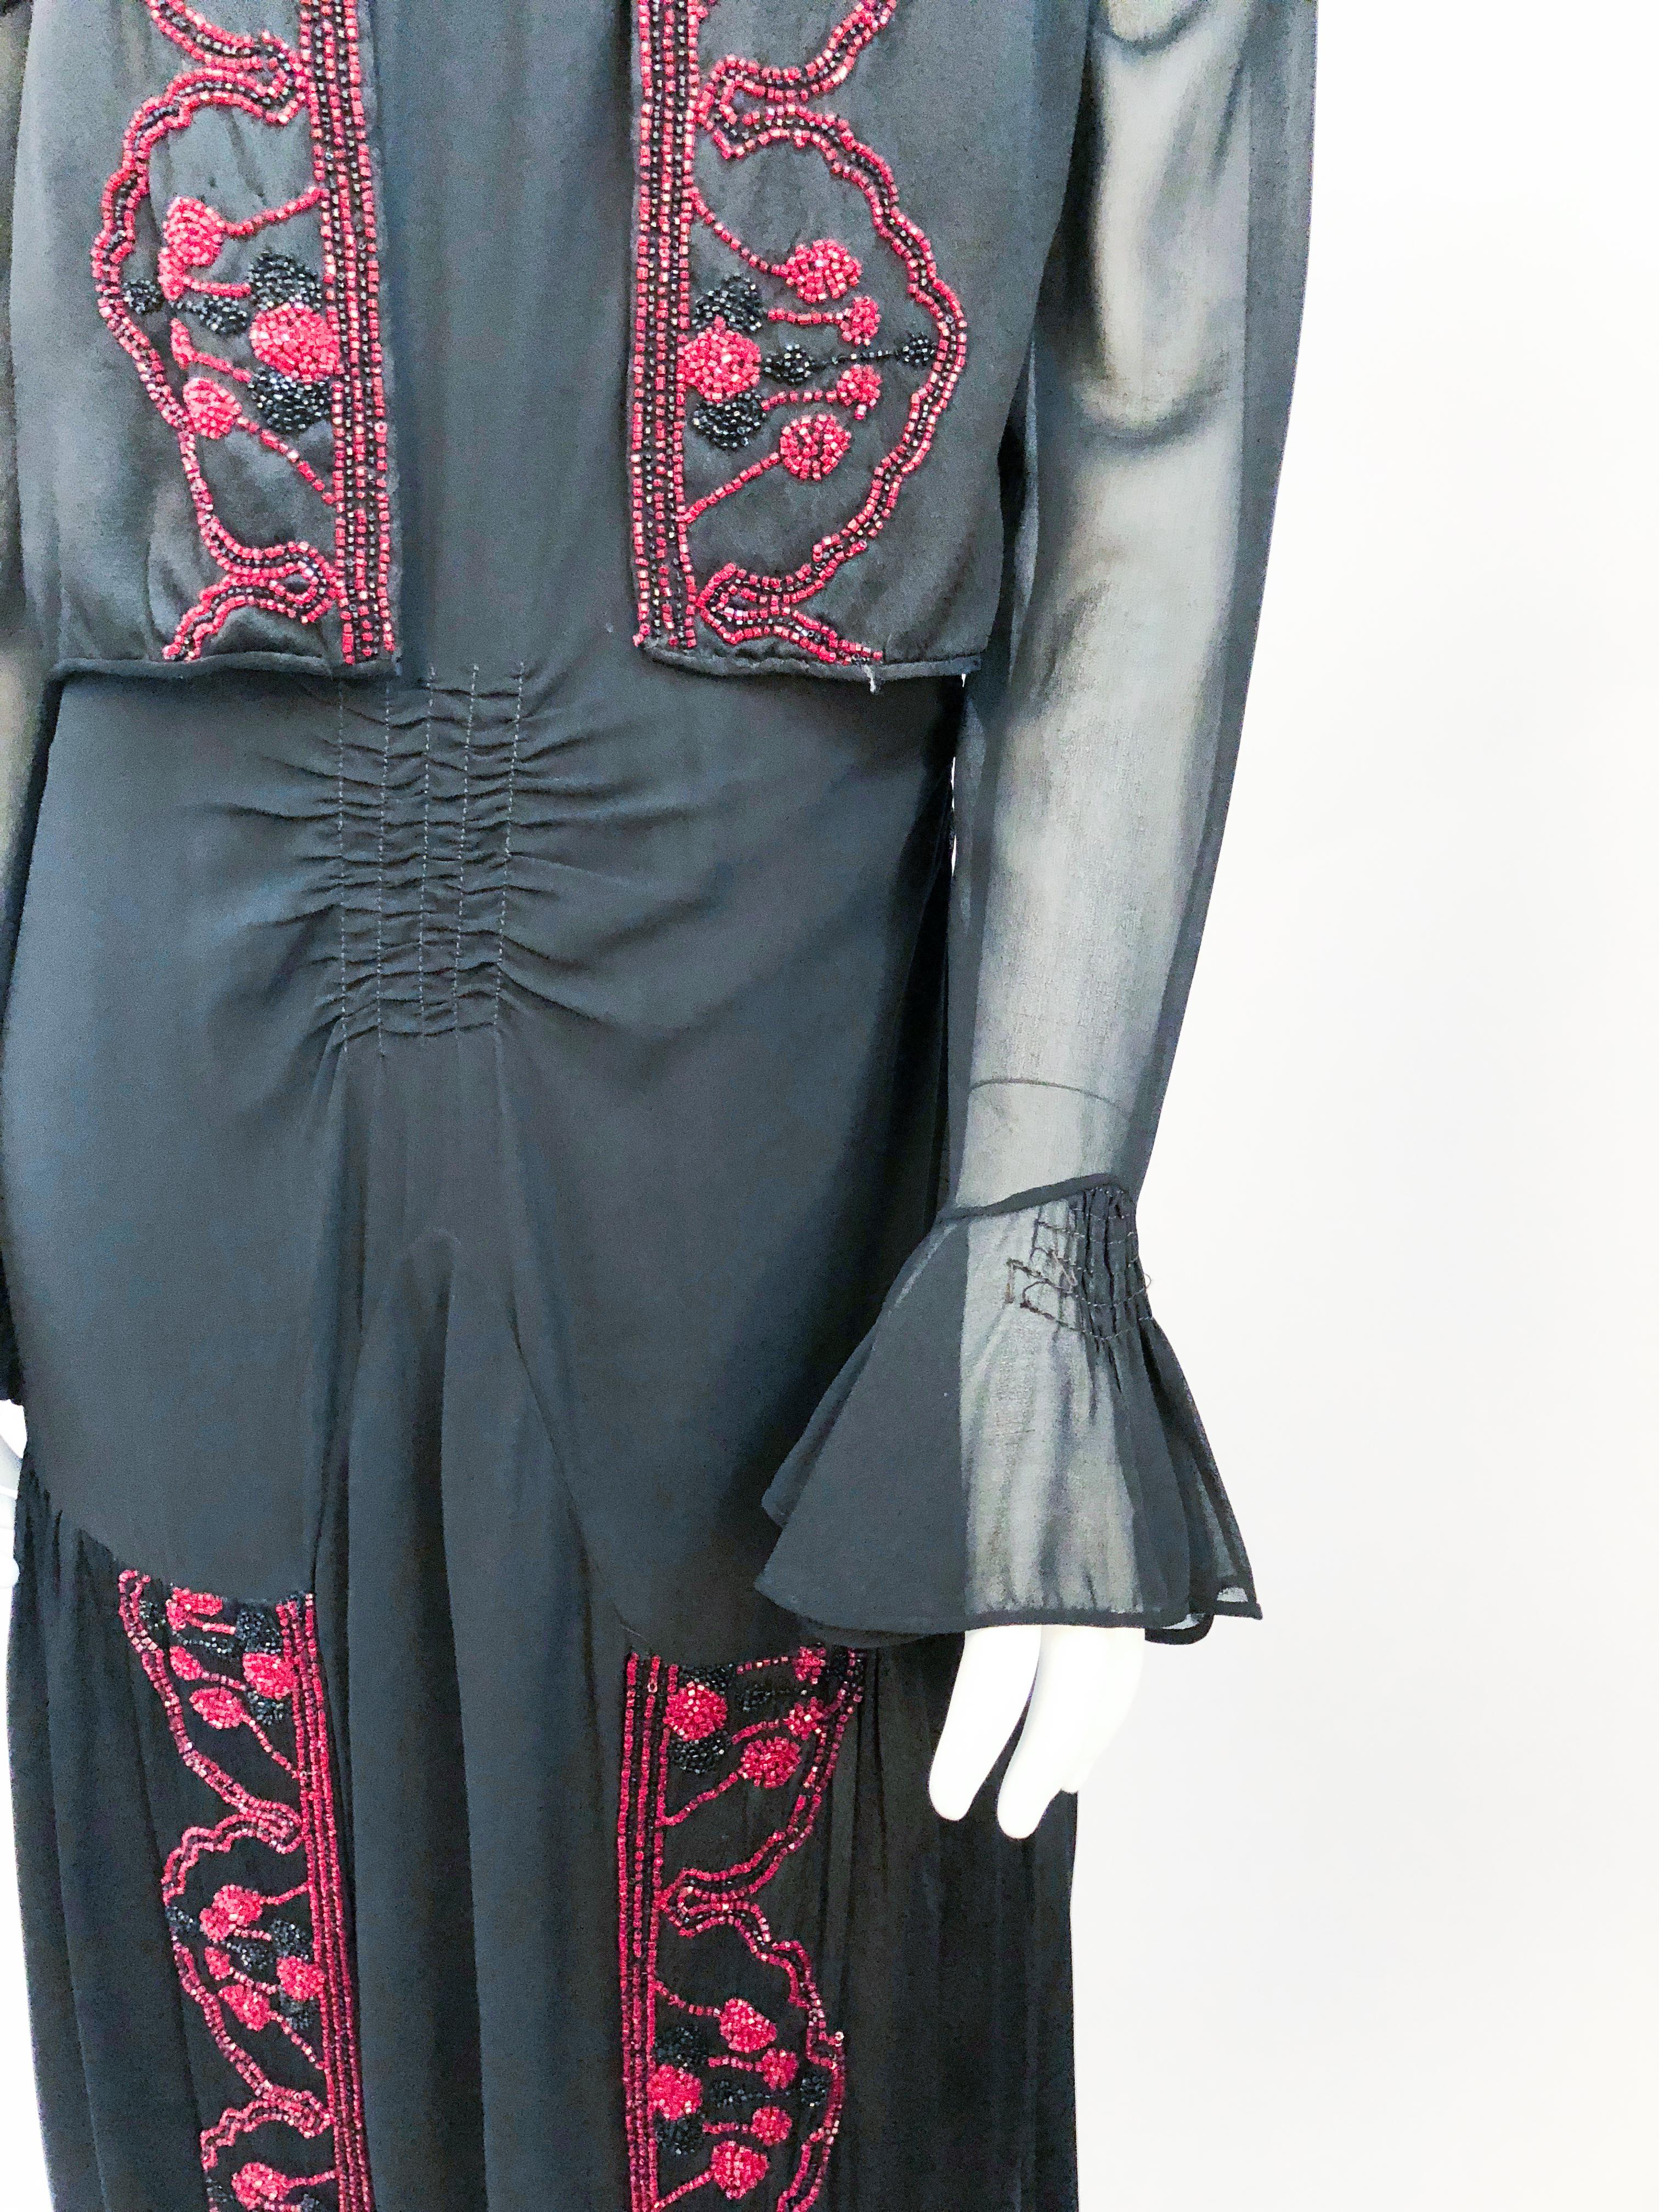 1920s Black Silk Chiffon Dress and Vest with Hand Beading Detail In Good Condition For Sale In San Francisco, CA